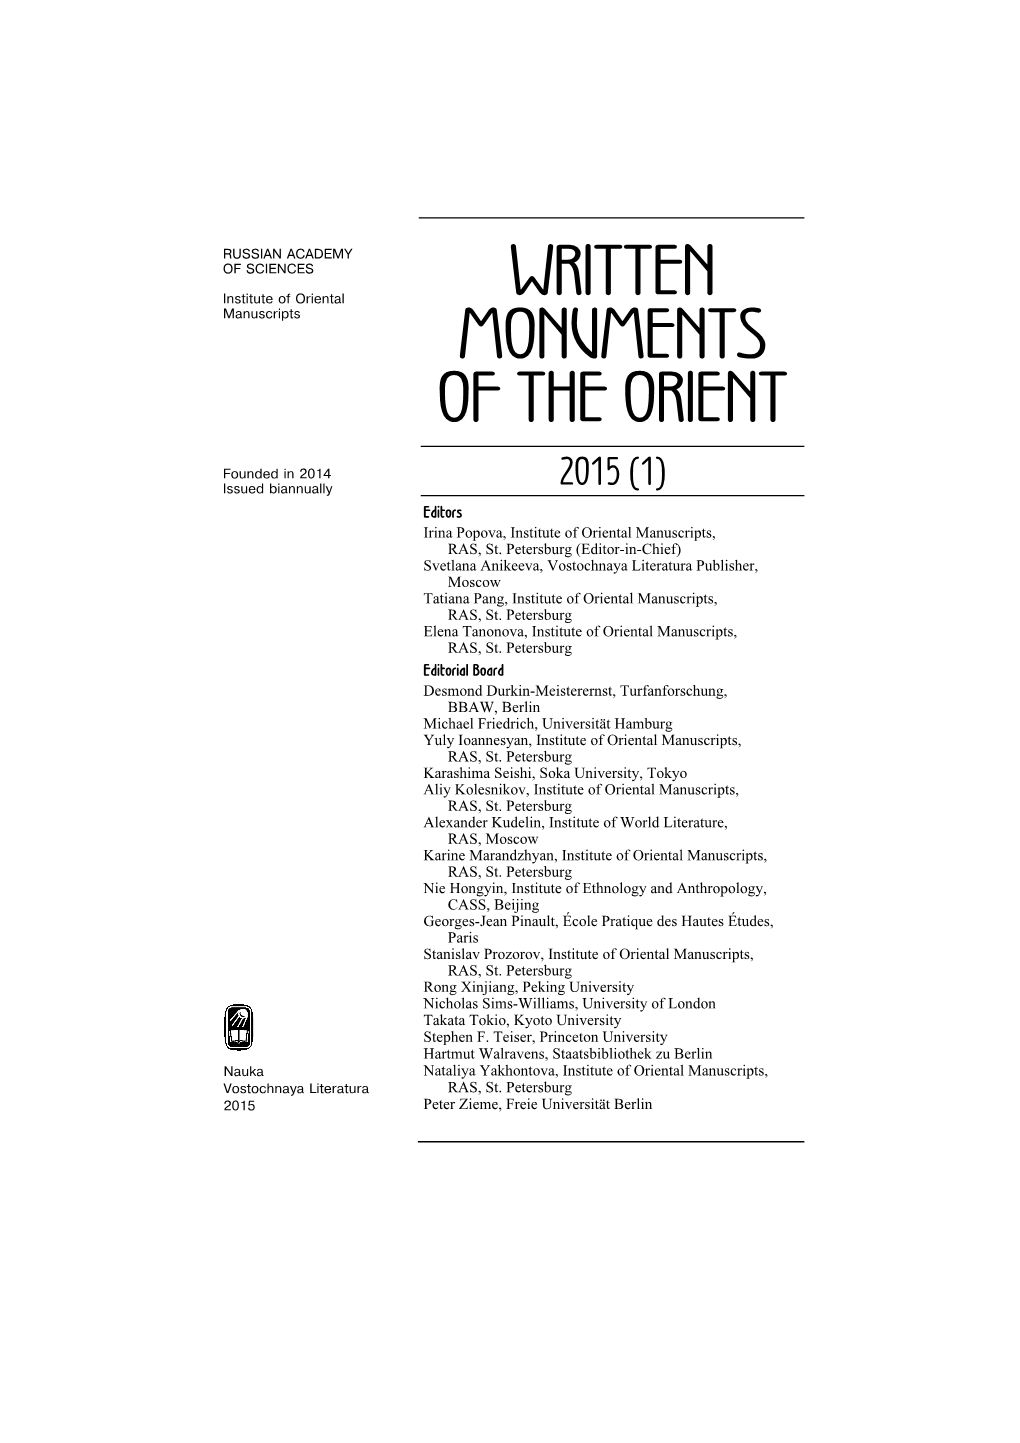 Written Monuments of the Orient], CXL)